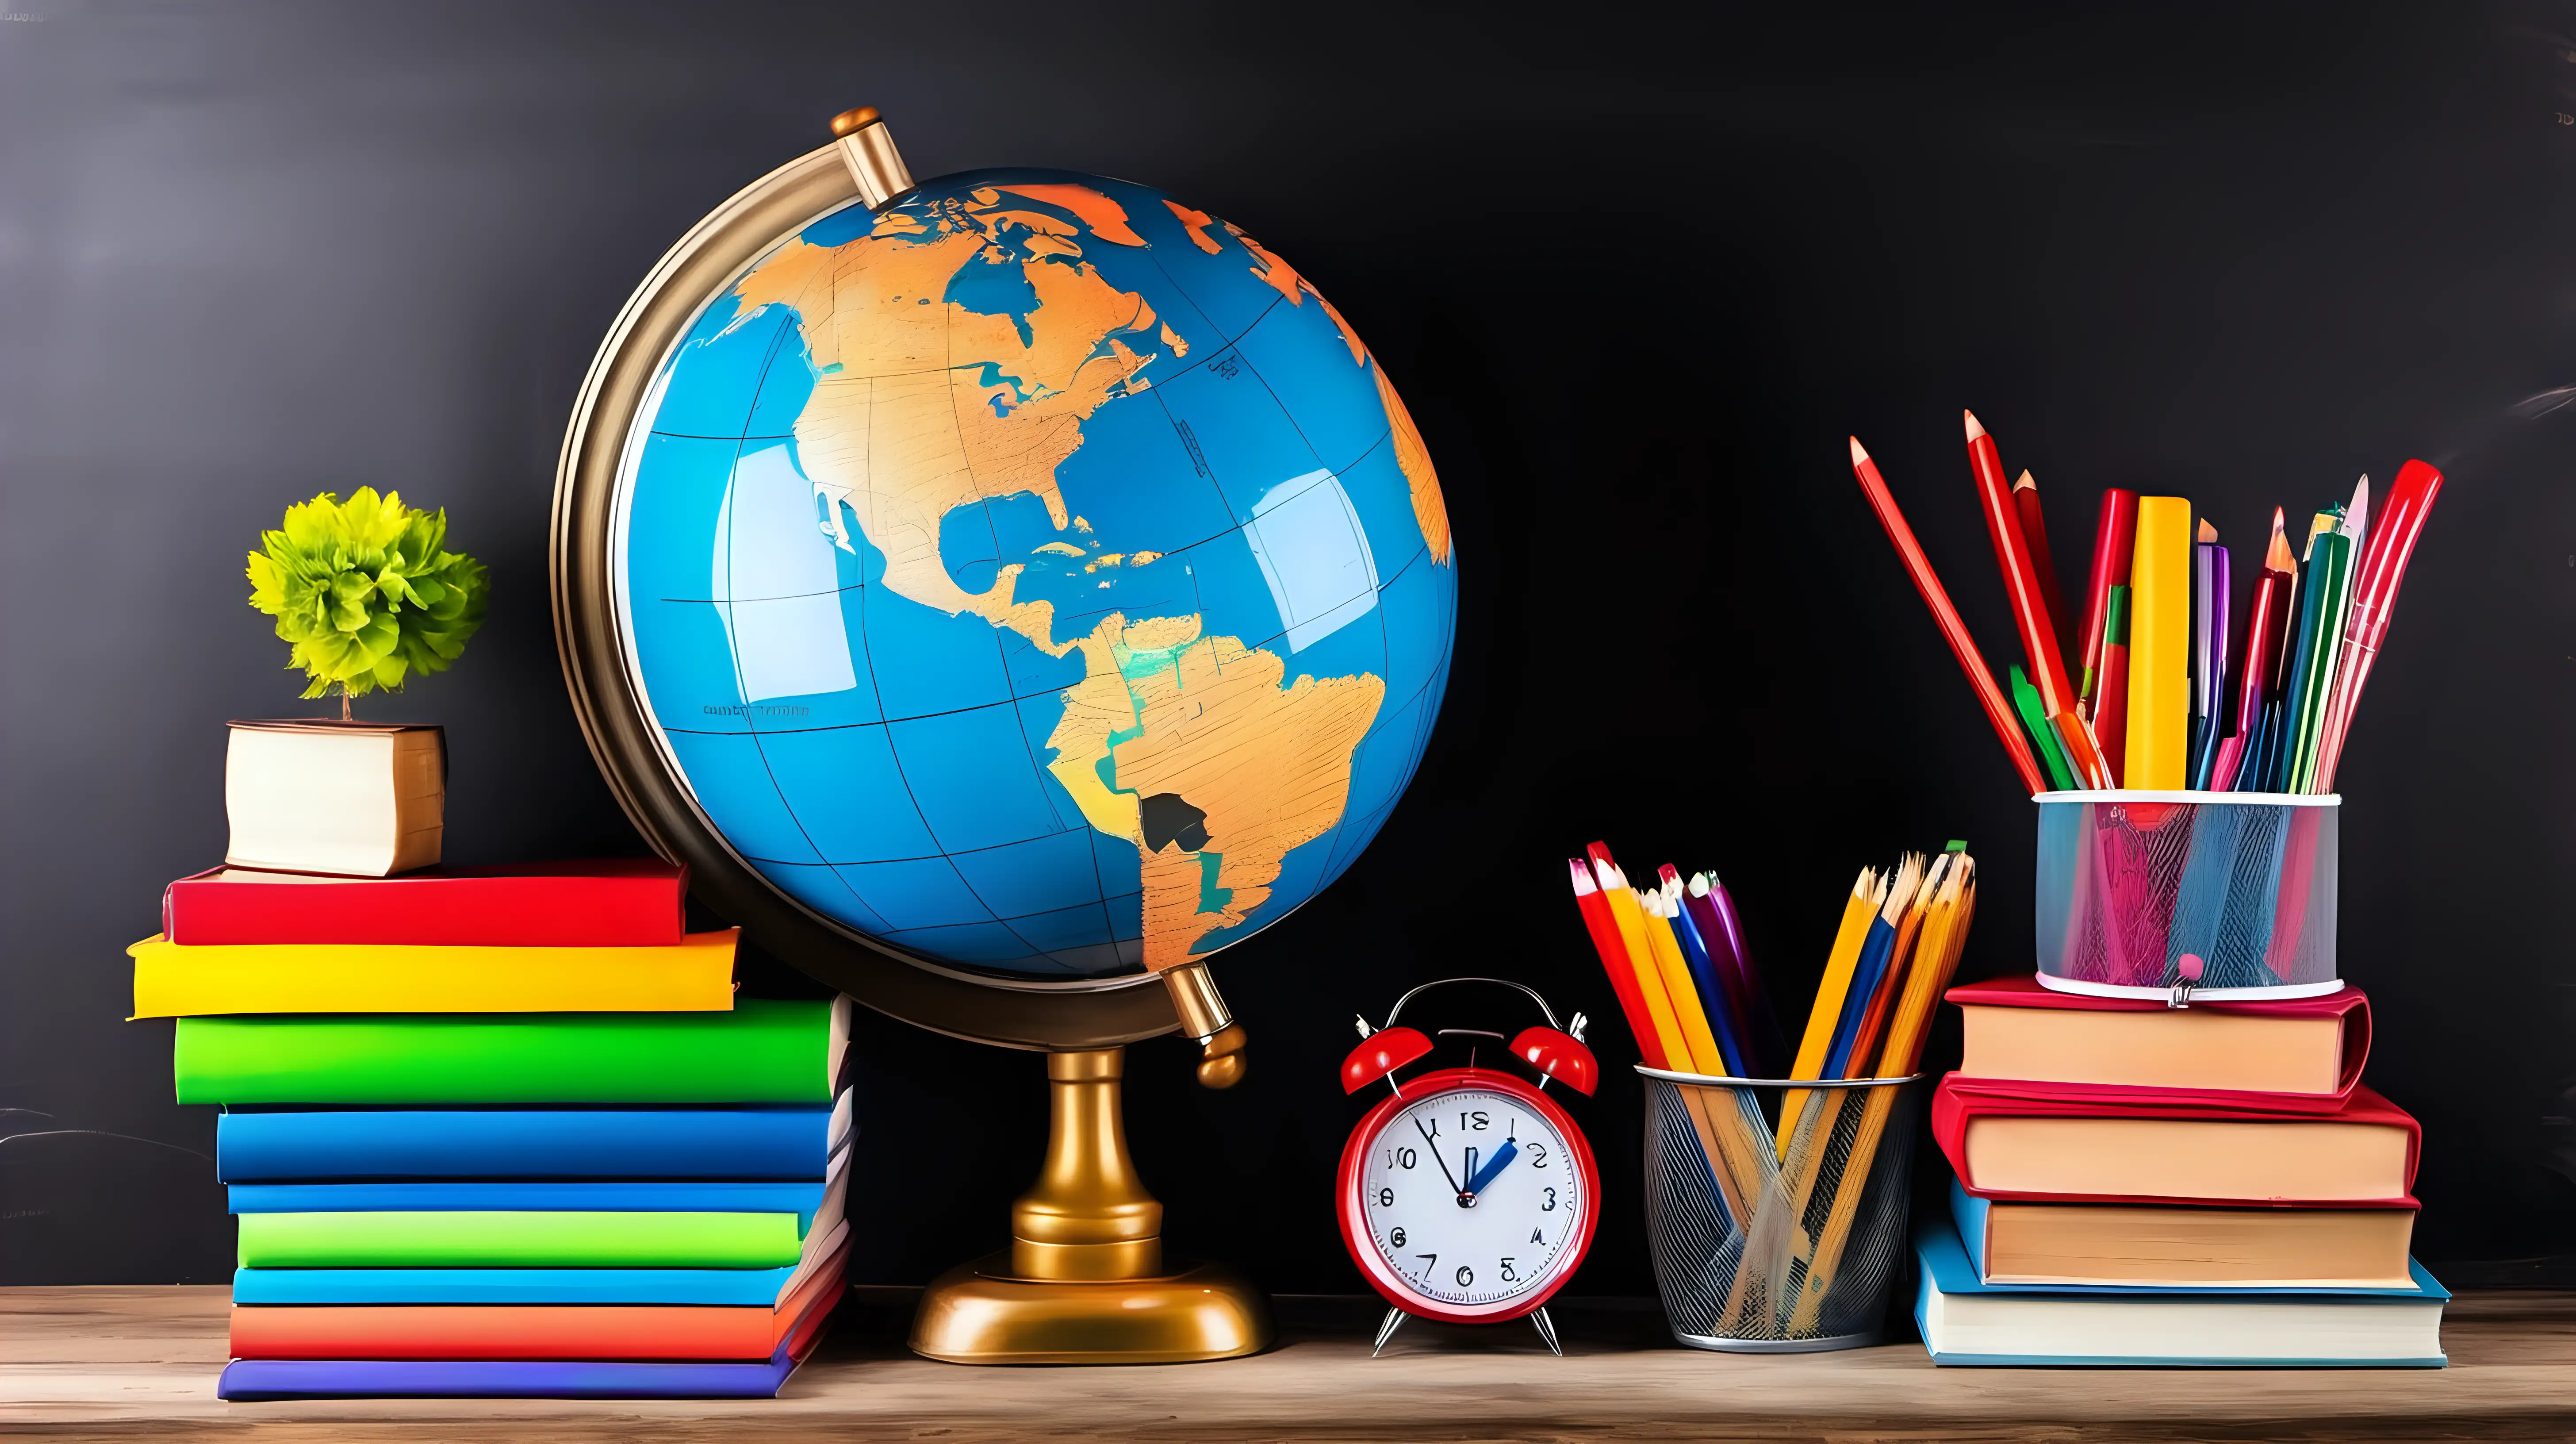 Earth Globe, Books, Notebooks, Colorful Stationery. Education and School Supplies. Blackboard Chalkboard Background for Learning. Stack of Books and Essentials on Wooden Table